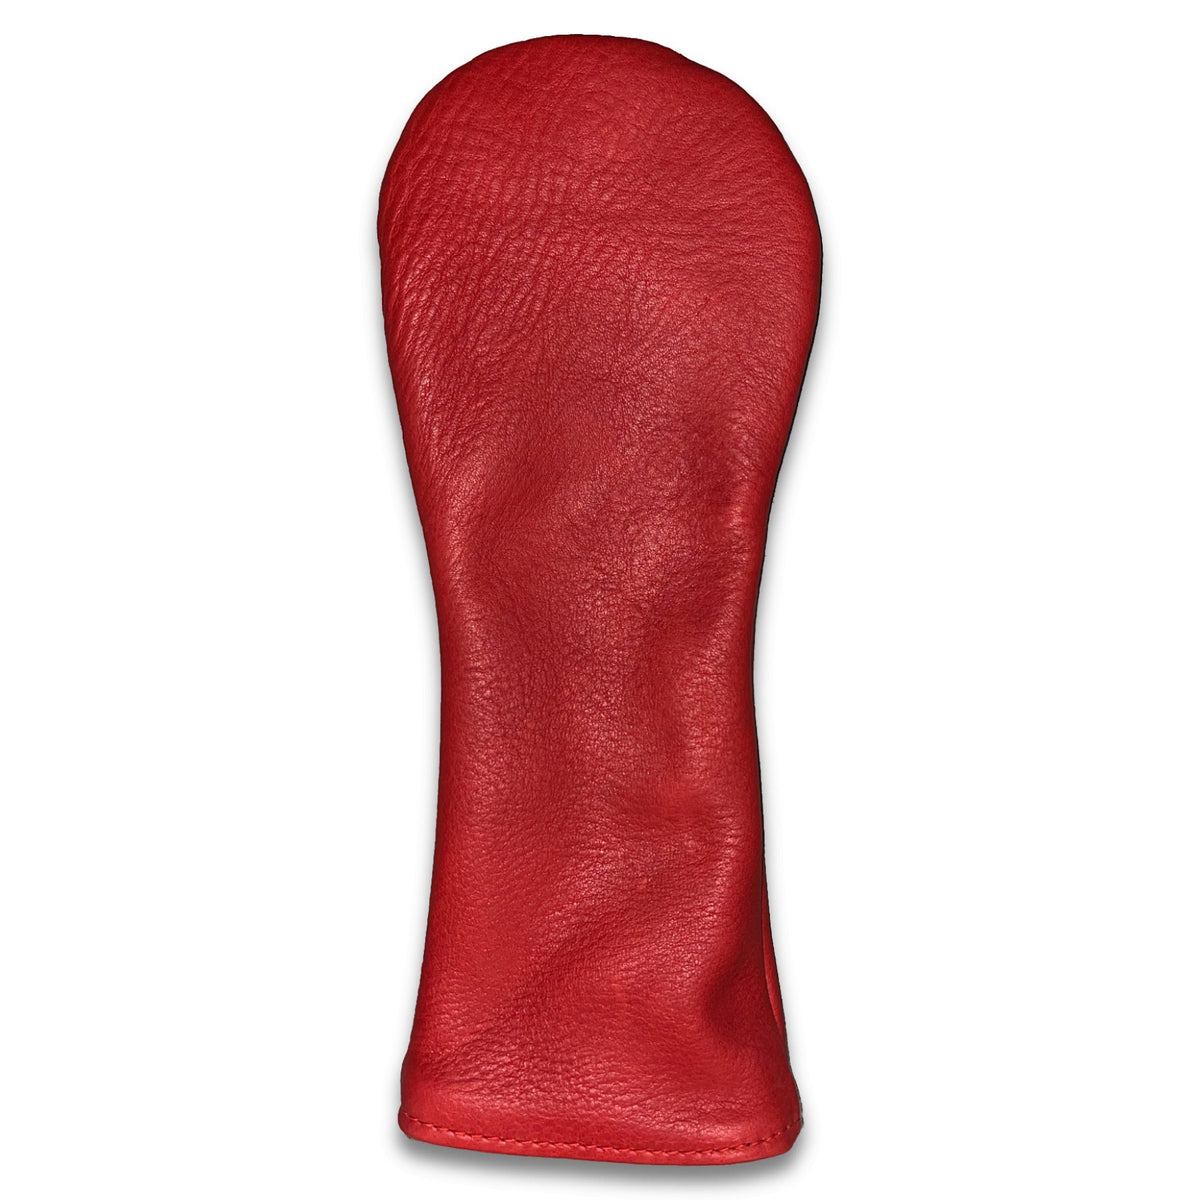 Ranger Leather Head Cover - Red - Fairway -